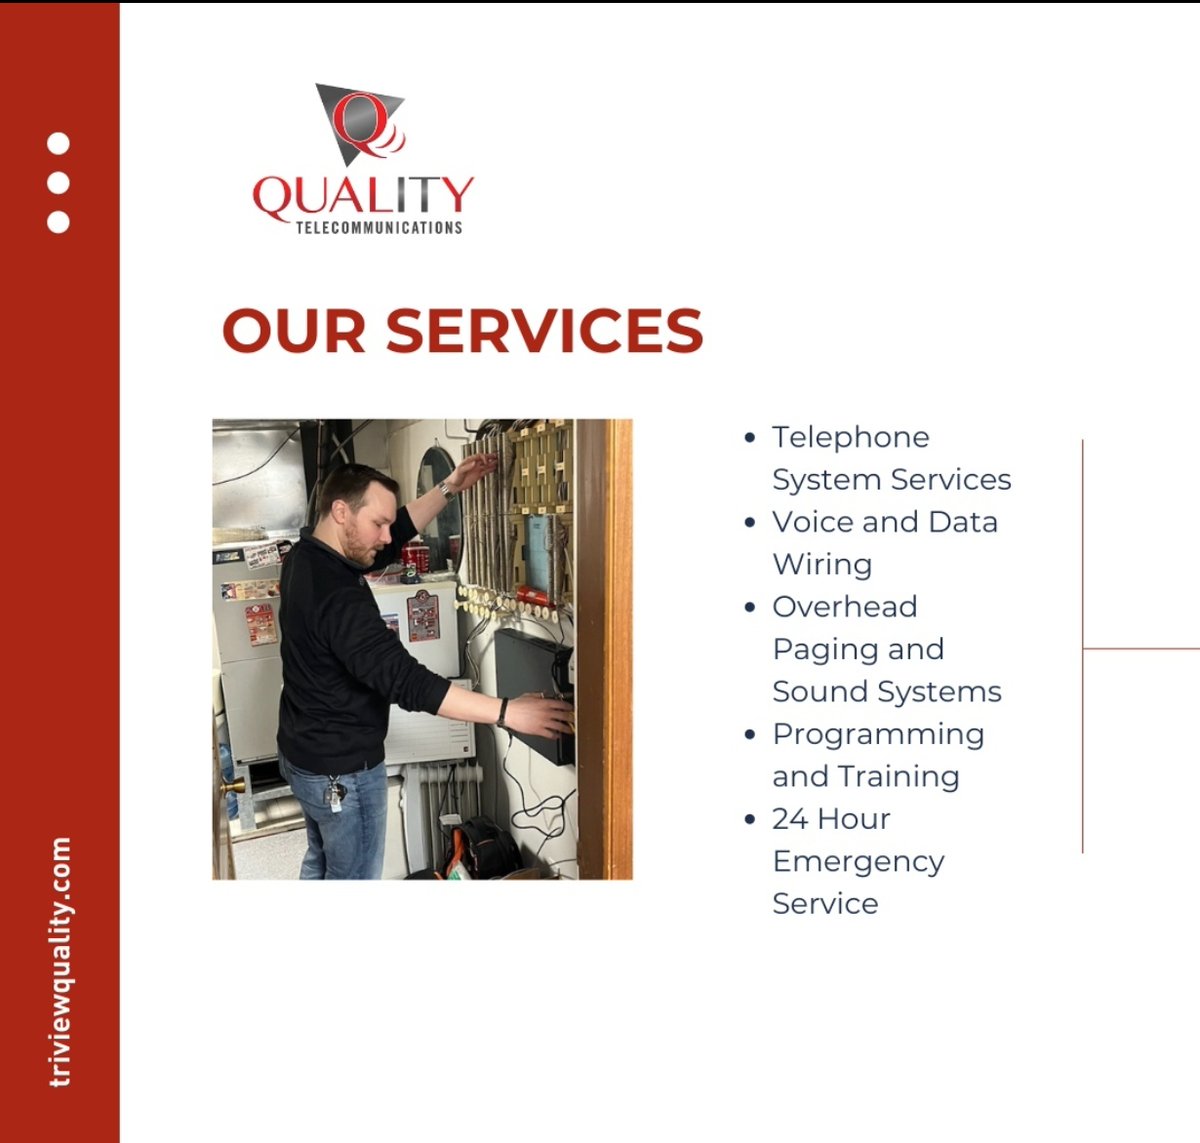 Why work with us?

With over 100 years of combined experience, you can rest assured that Quality technicians will always offer you the best solution, service, and support.

Visit our website to learn more: triviewquality.com

#Telecommunications #QualityTelecommunications